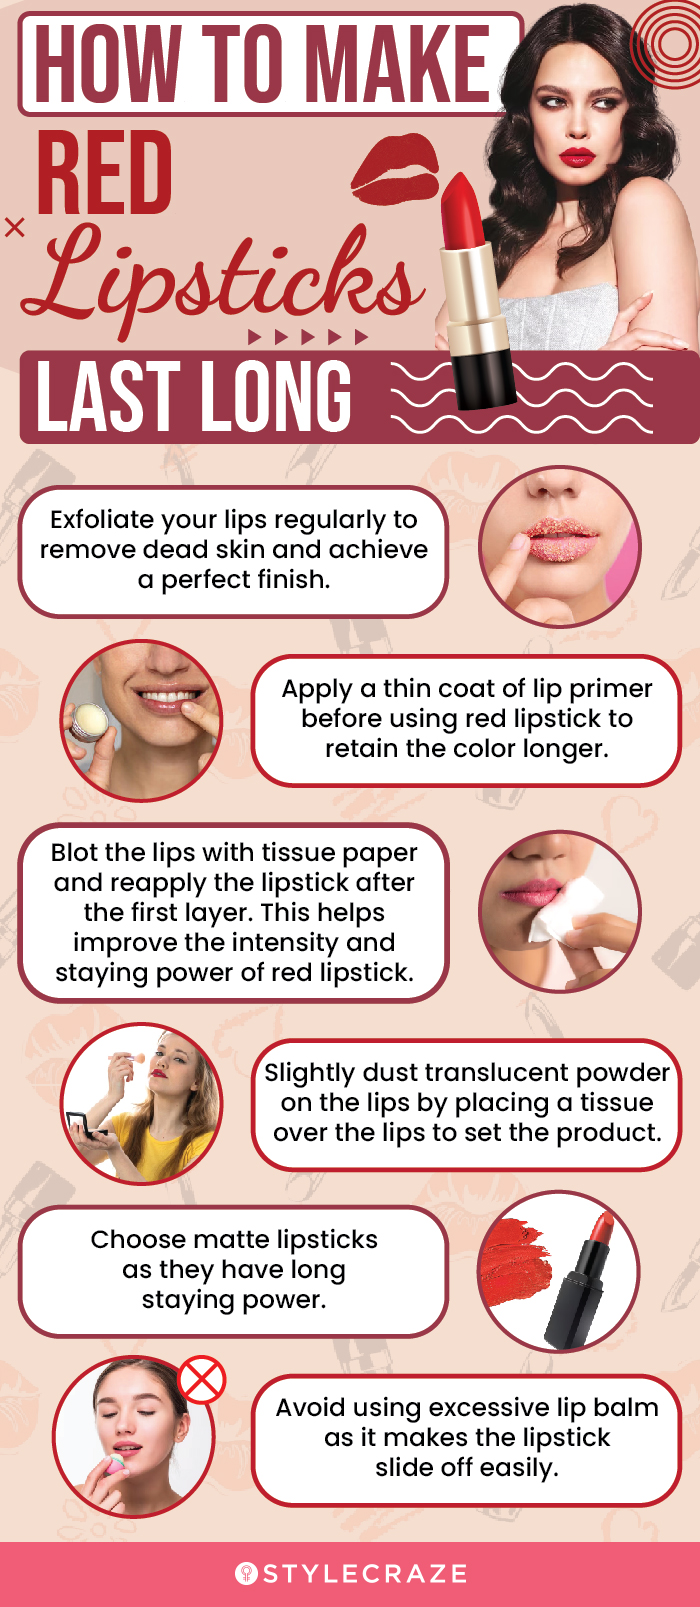 How To Make Red Lipsticks Last Long (infographic)